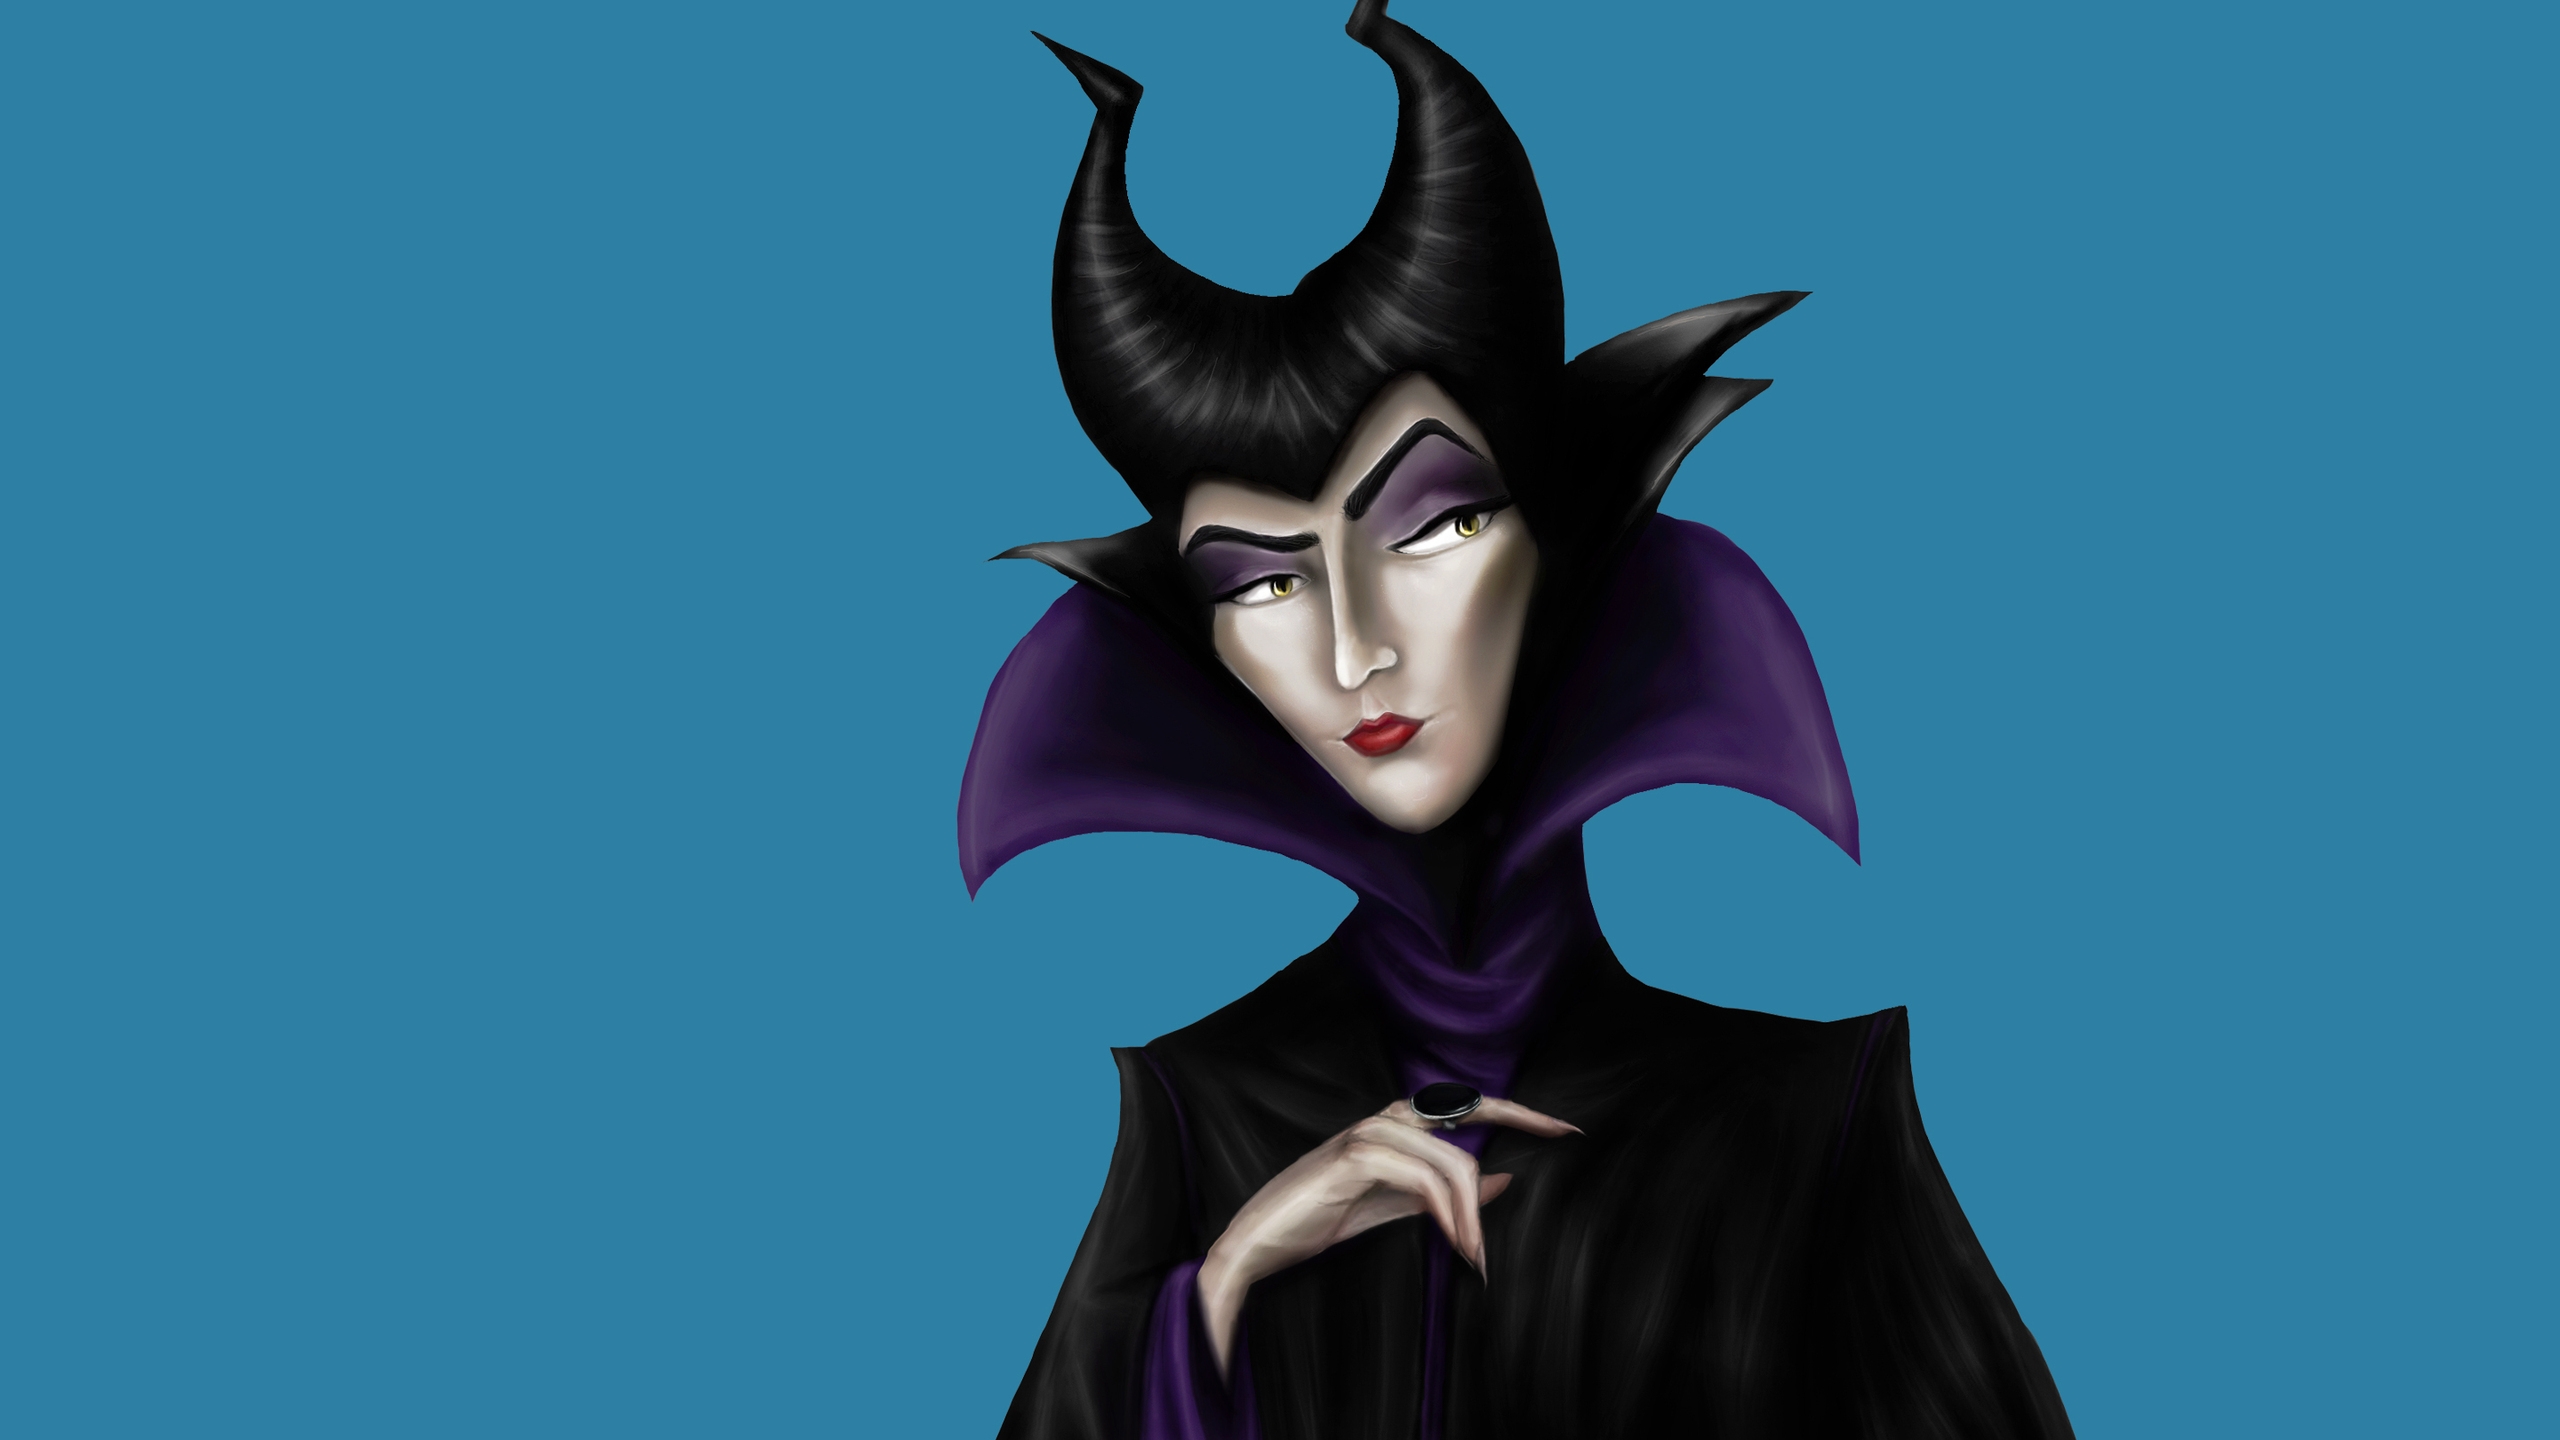 Maleficent Drawing for 2560x1440 HDTV resolution